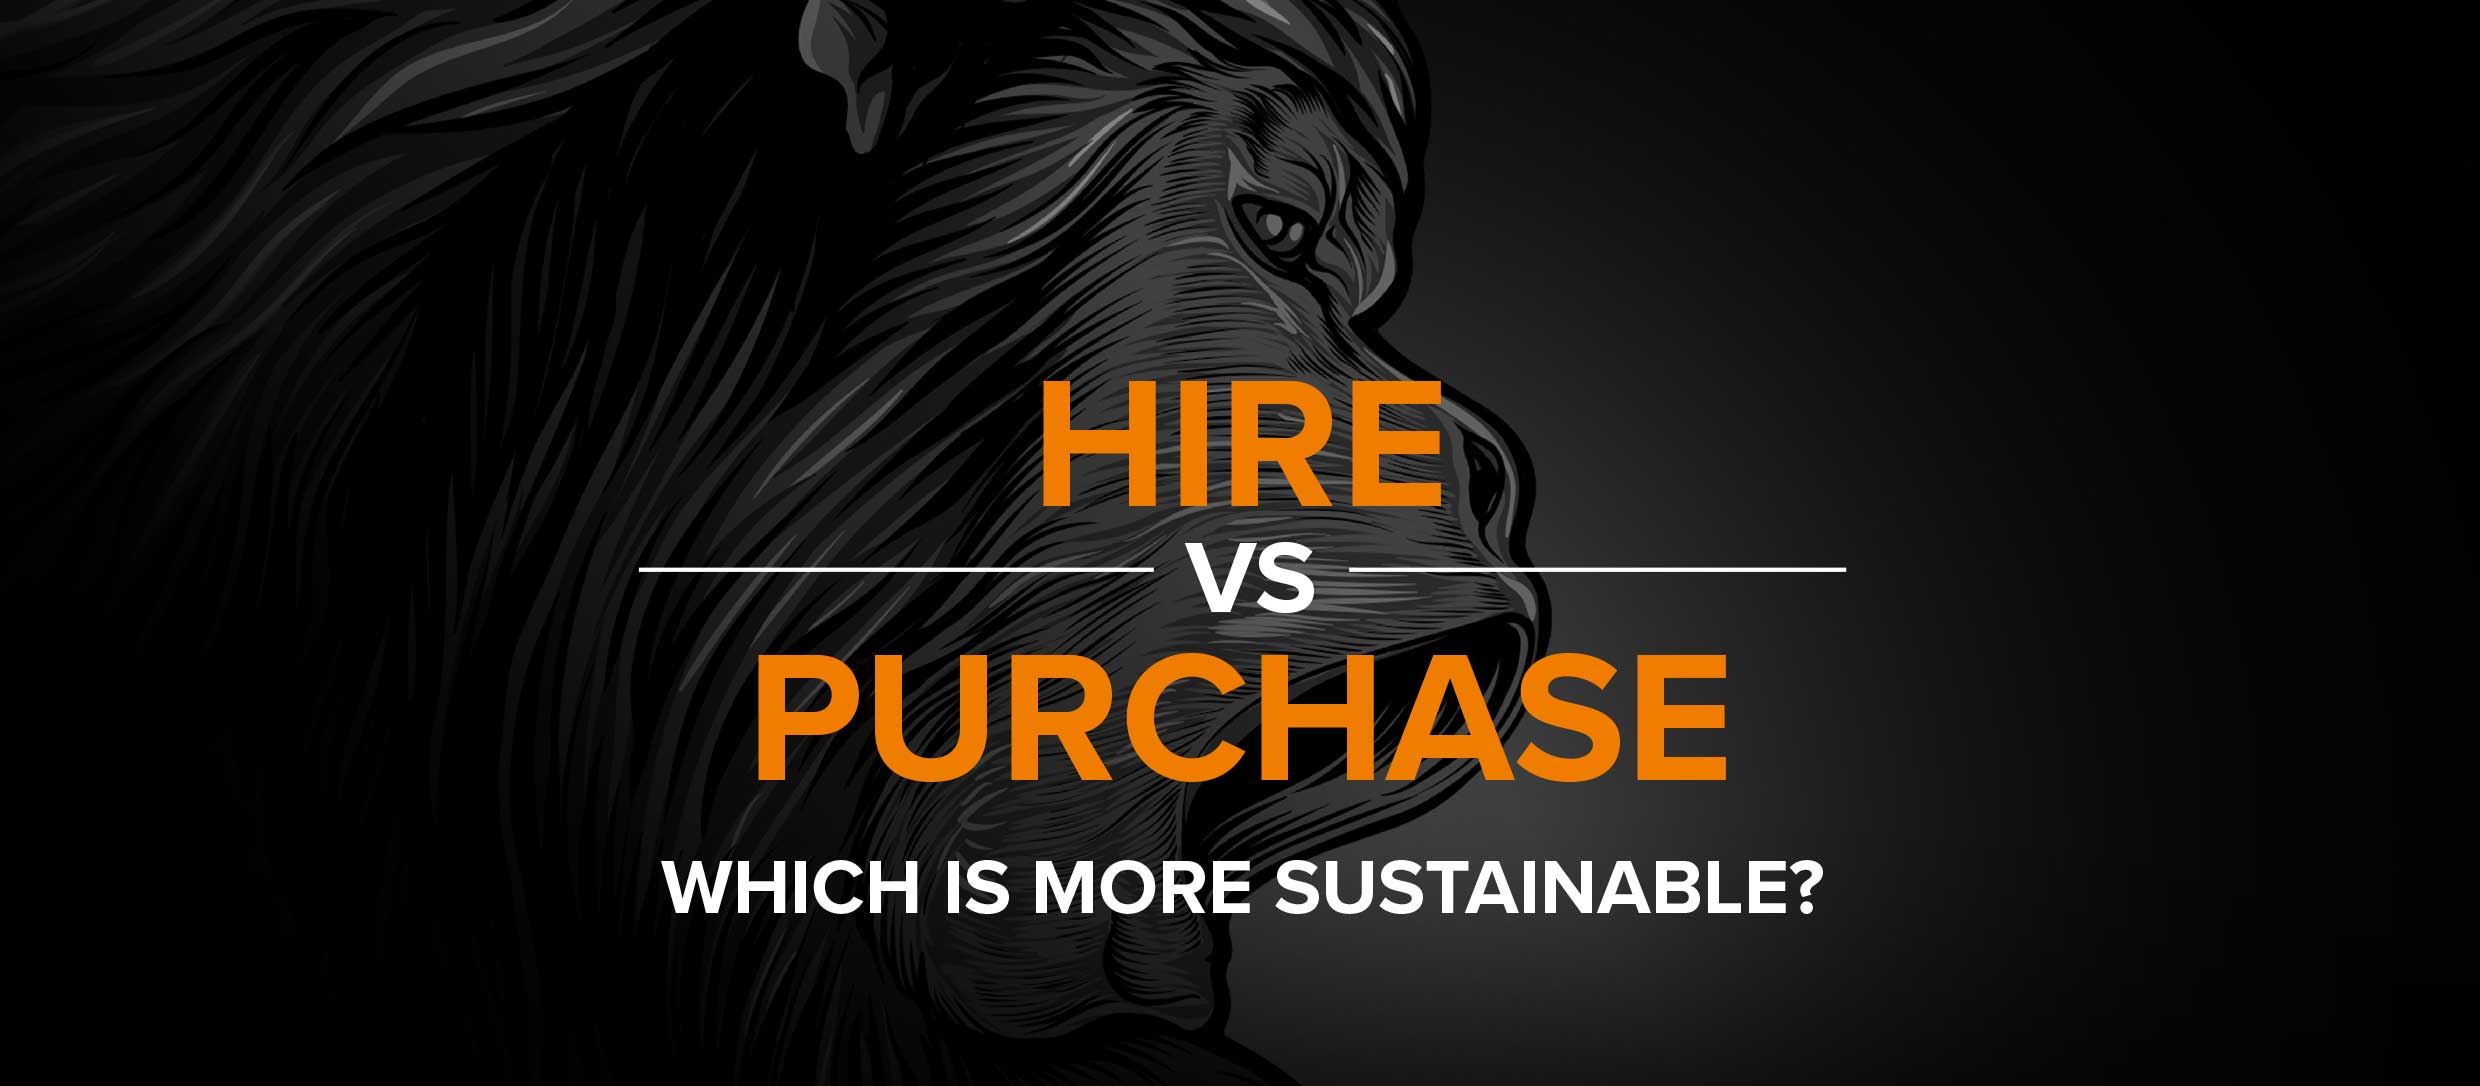 Hire Vs Purchase Website Banner